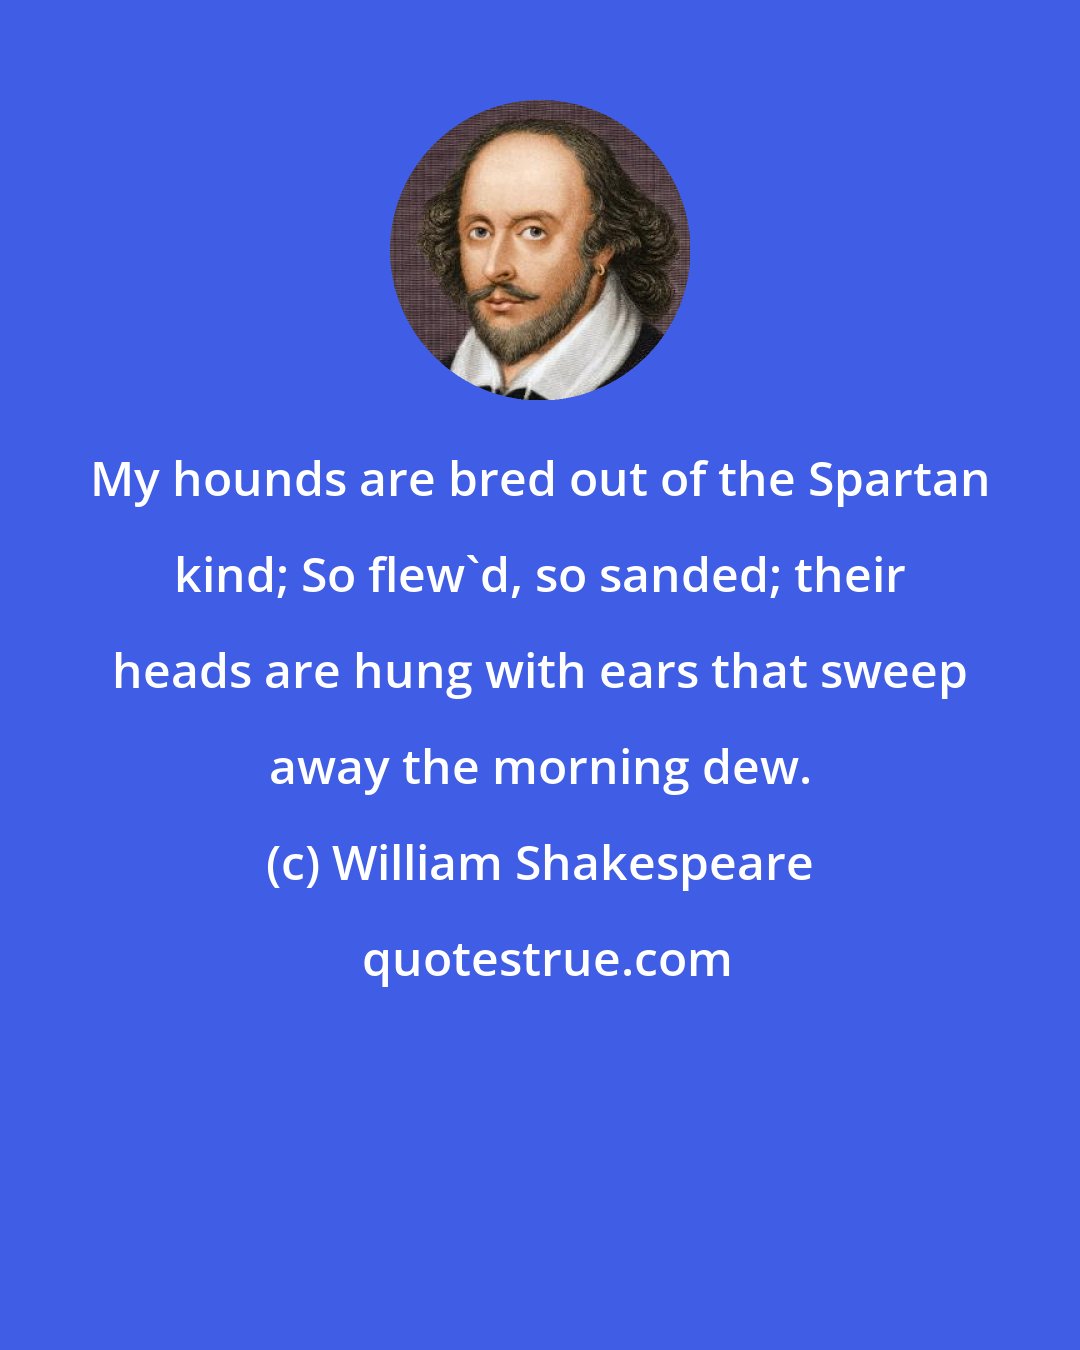 William Shakespeare: My hounds are bred out of the Spartan kind; So flew'd, so sanded; their heads are hung with ears that sweep away the morning dew.